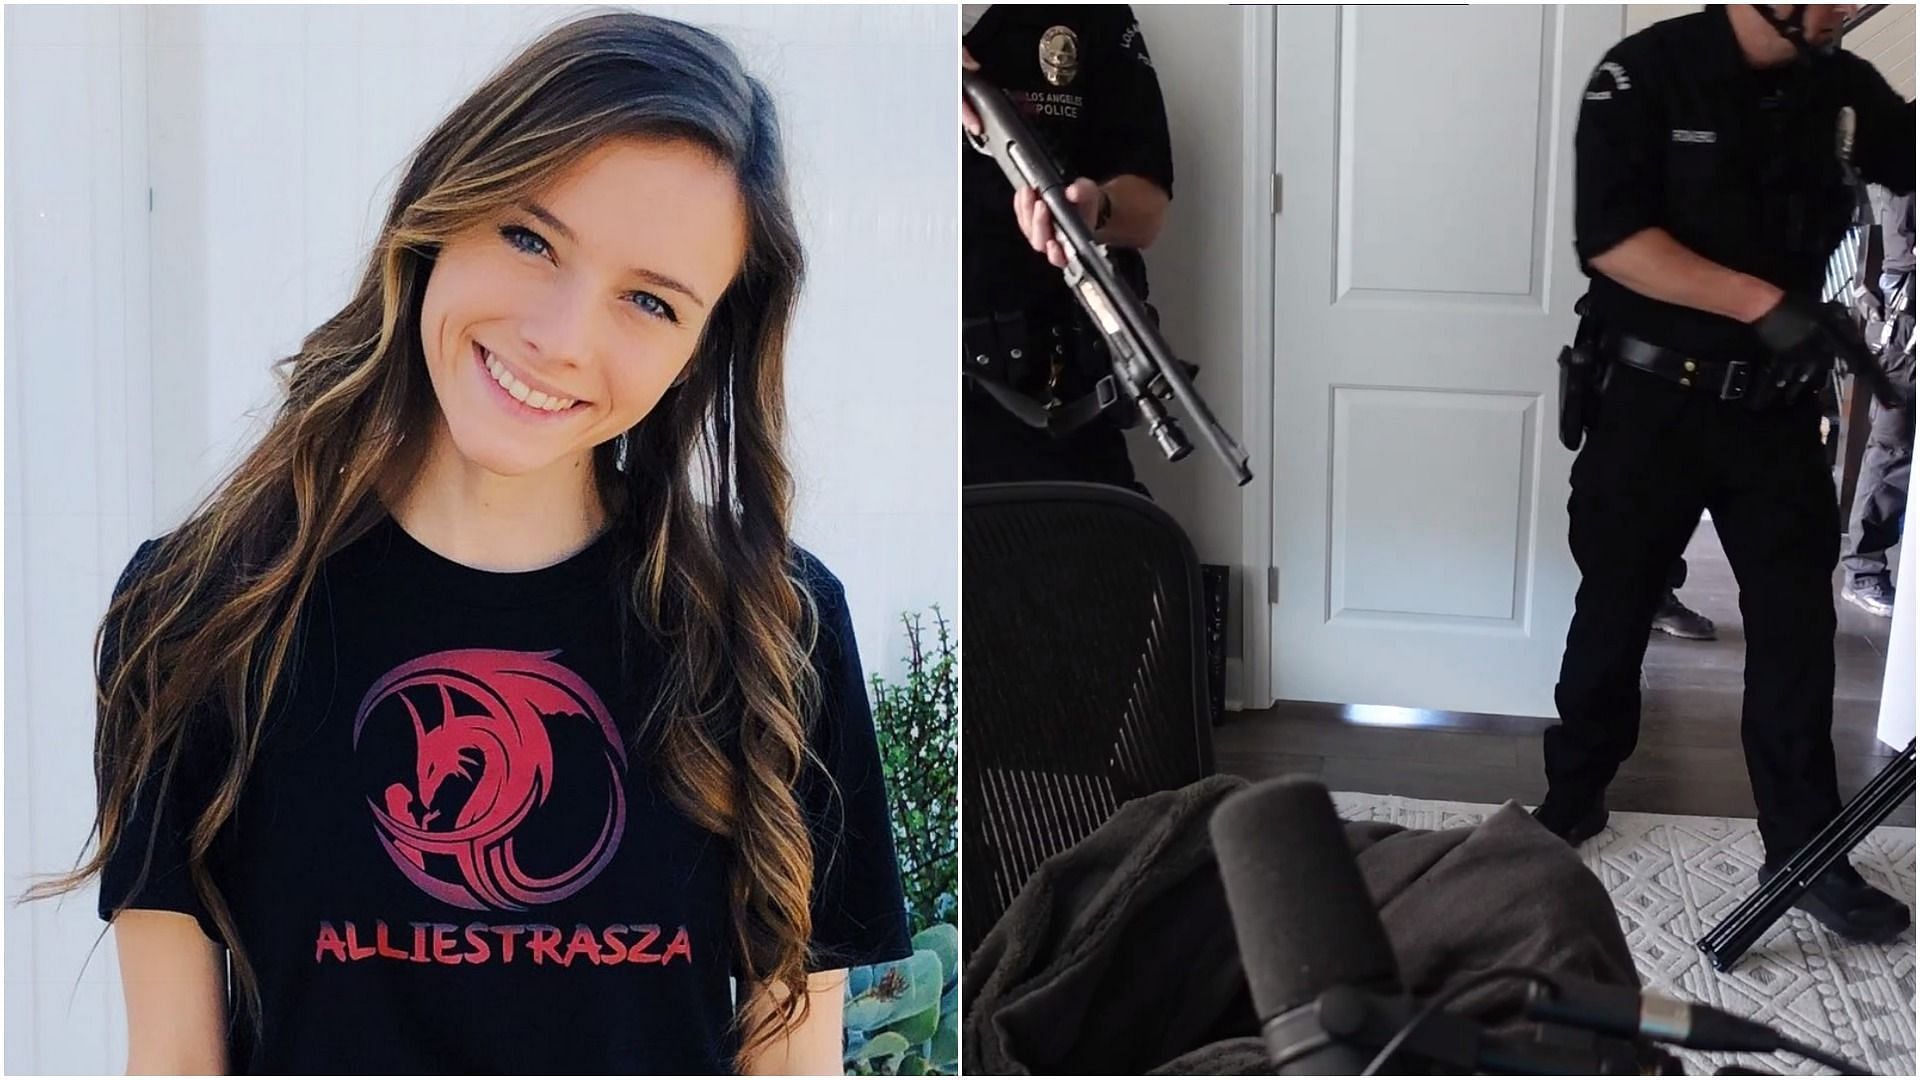 Twitch streamer Alliestrasza was raided by armed officers while livestreaming (Image via Sportskeeda)